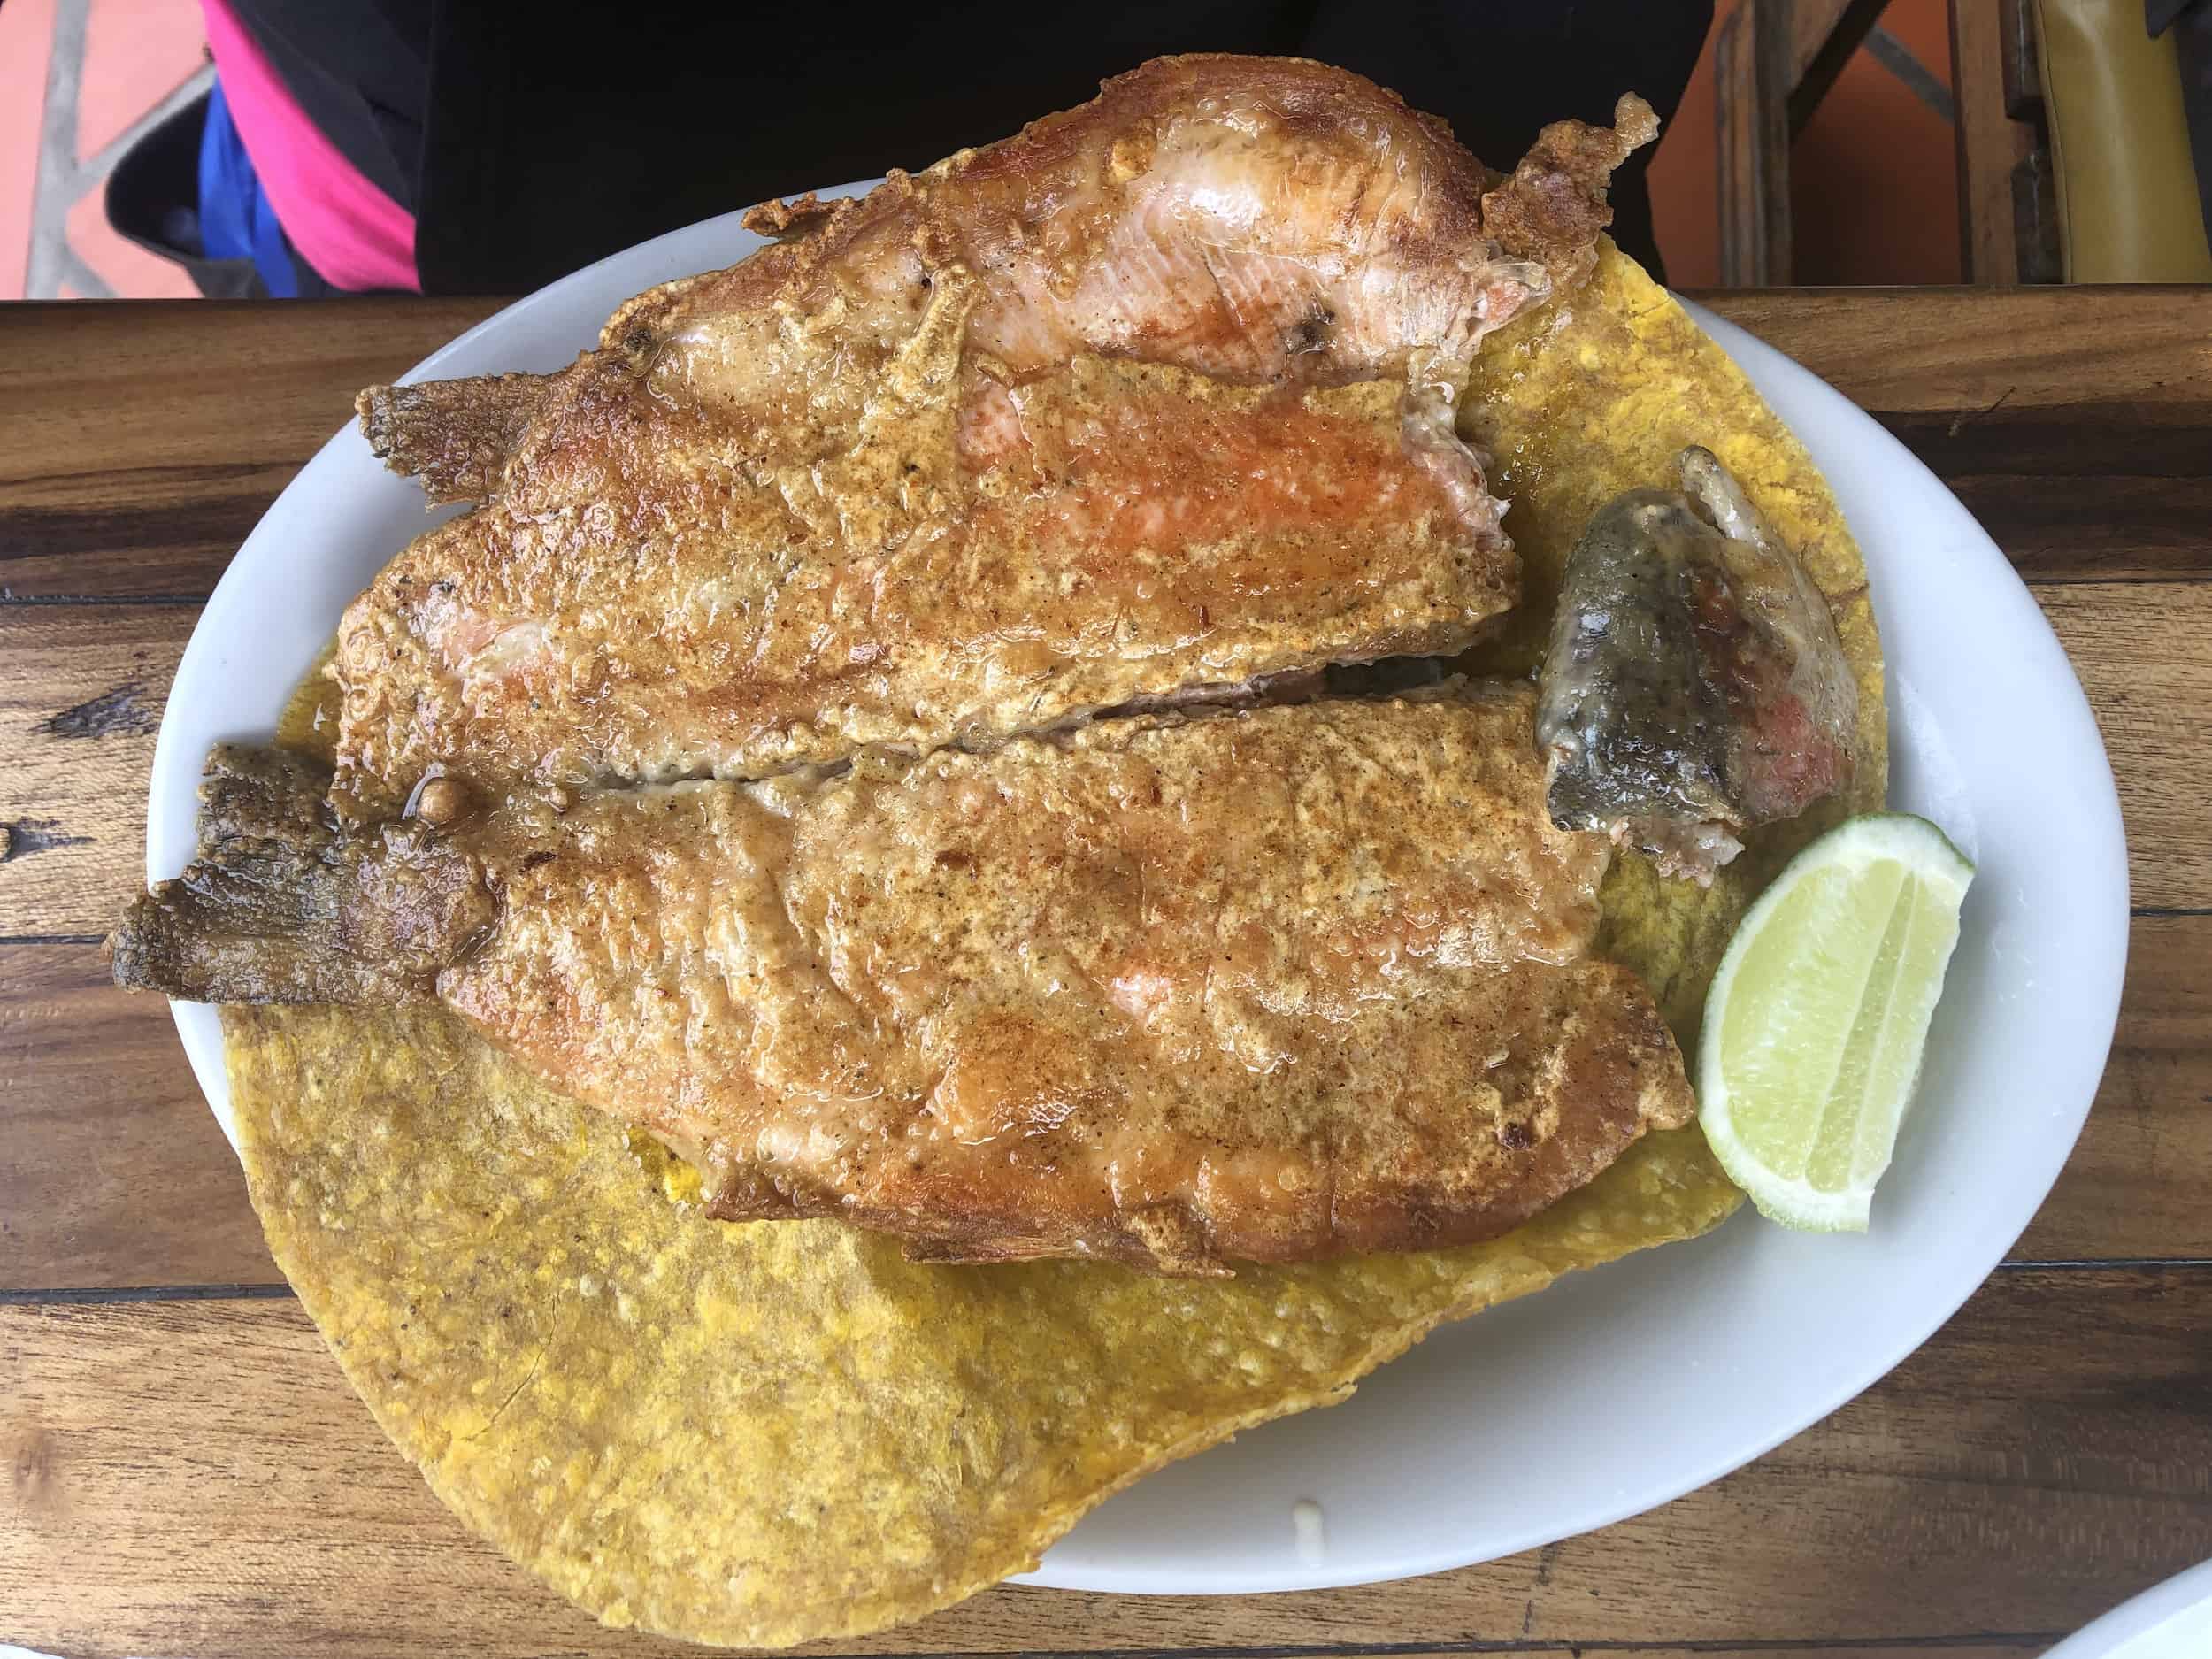 Steamed trout at Bosques de Cocora in Cocora Valley, Colombia